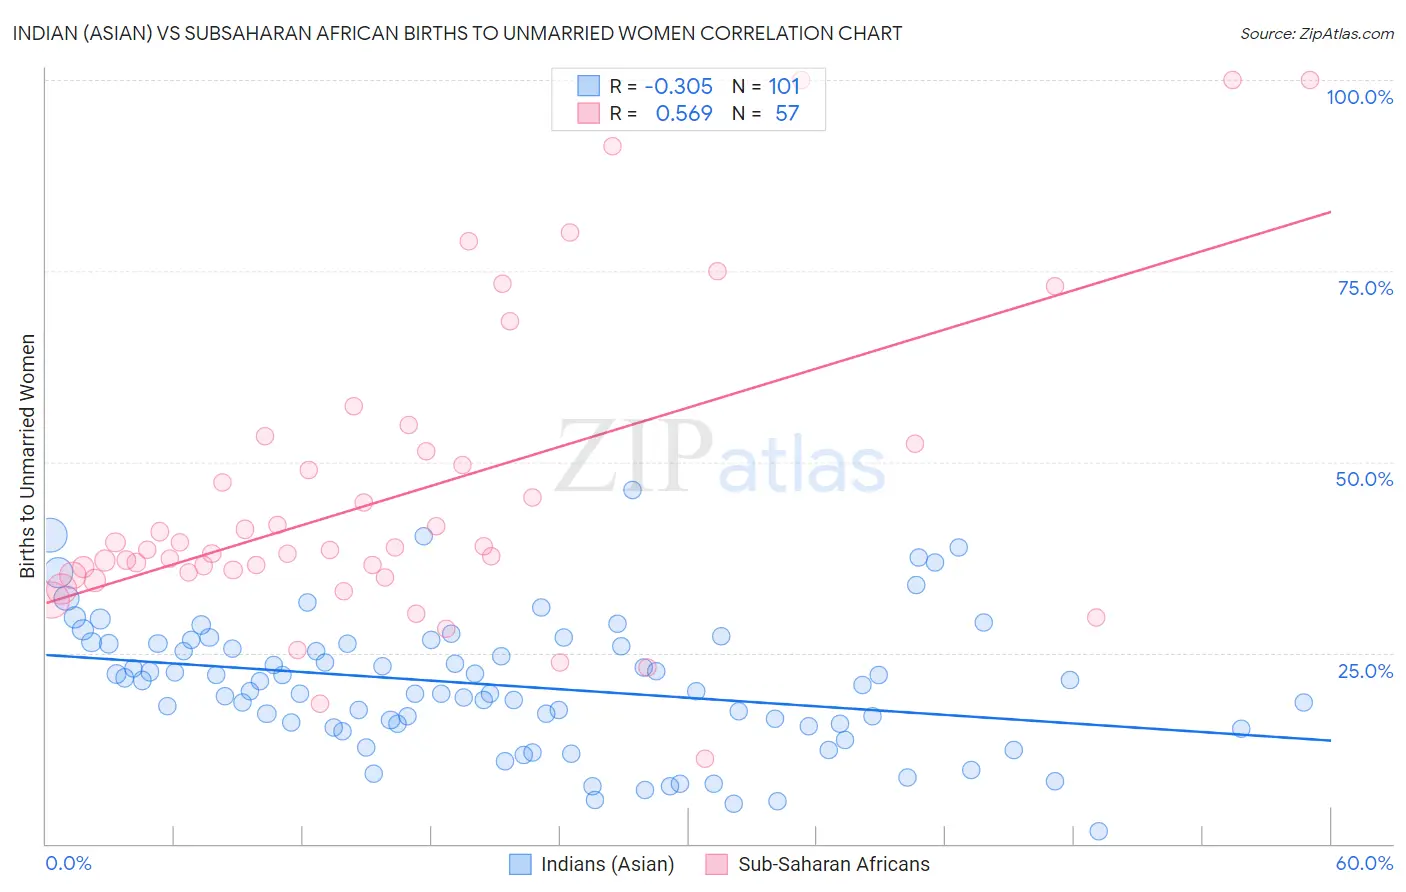 Indian (Asian) vs Subsaharan African Births to Unmarried Women